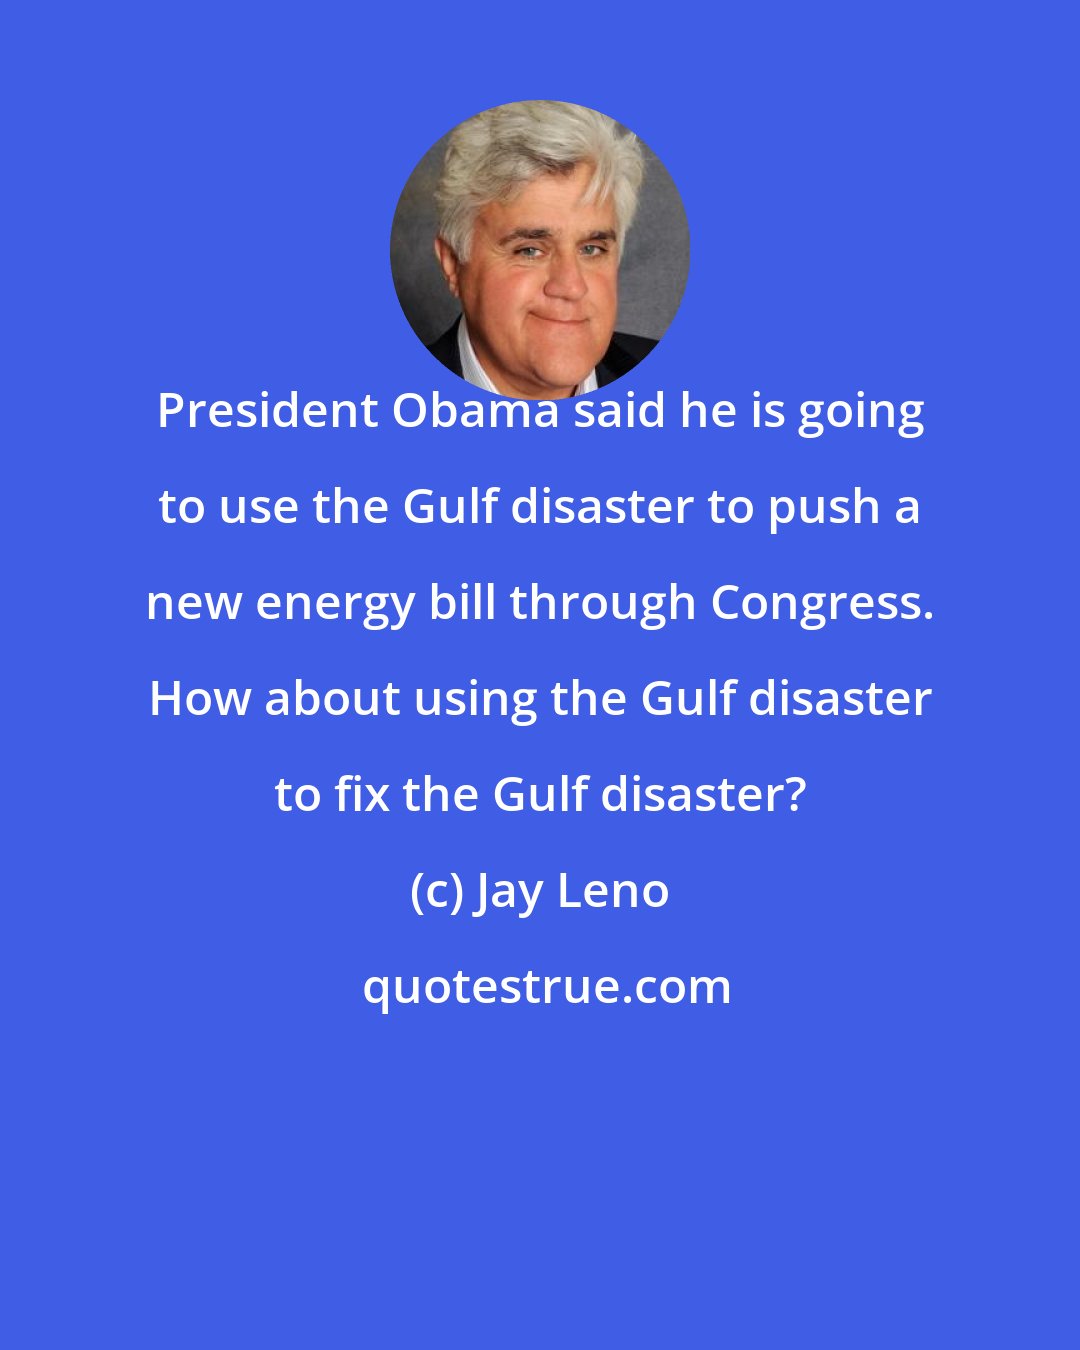 Jay Leno: President Obama said he is going to use the Gulf disaster to push a new energy bill through Congress. How about using the Gulf disaster to fix the Gulf disaster?